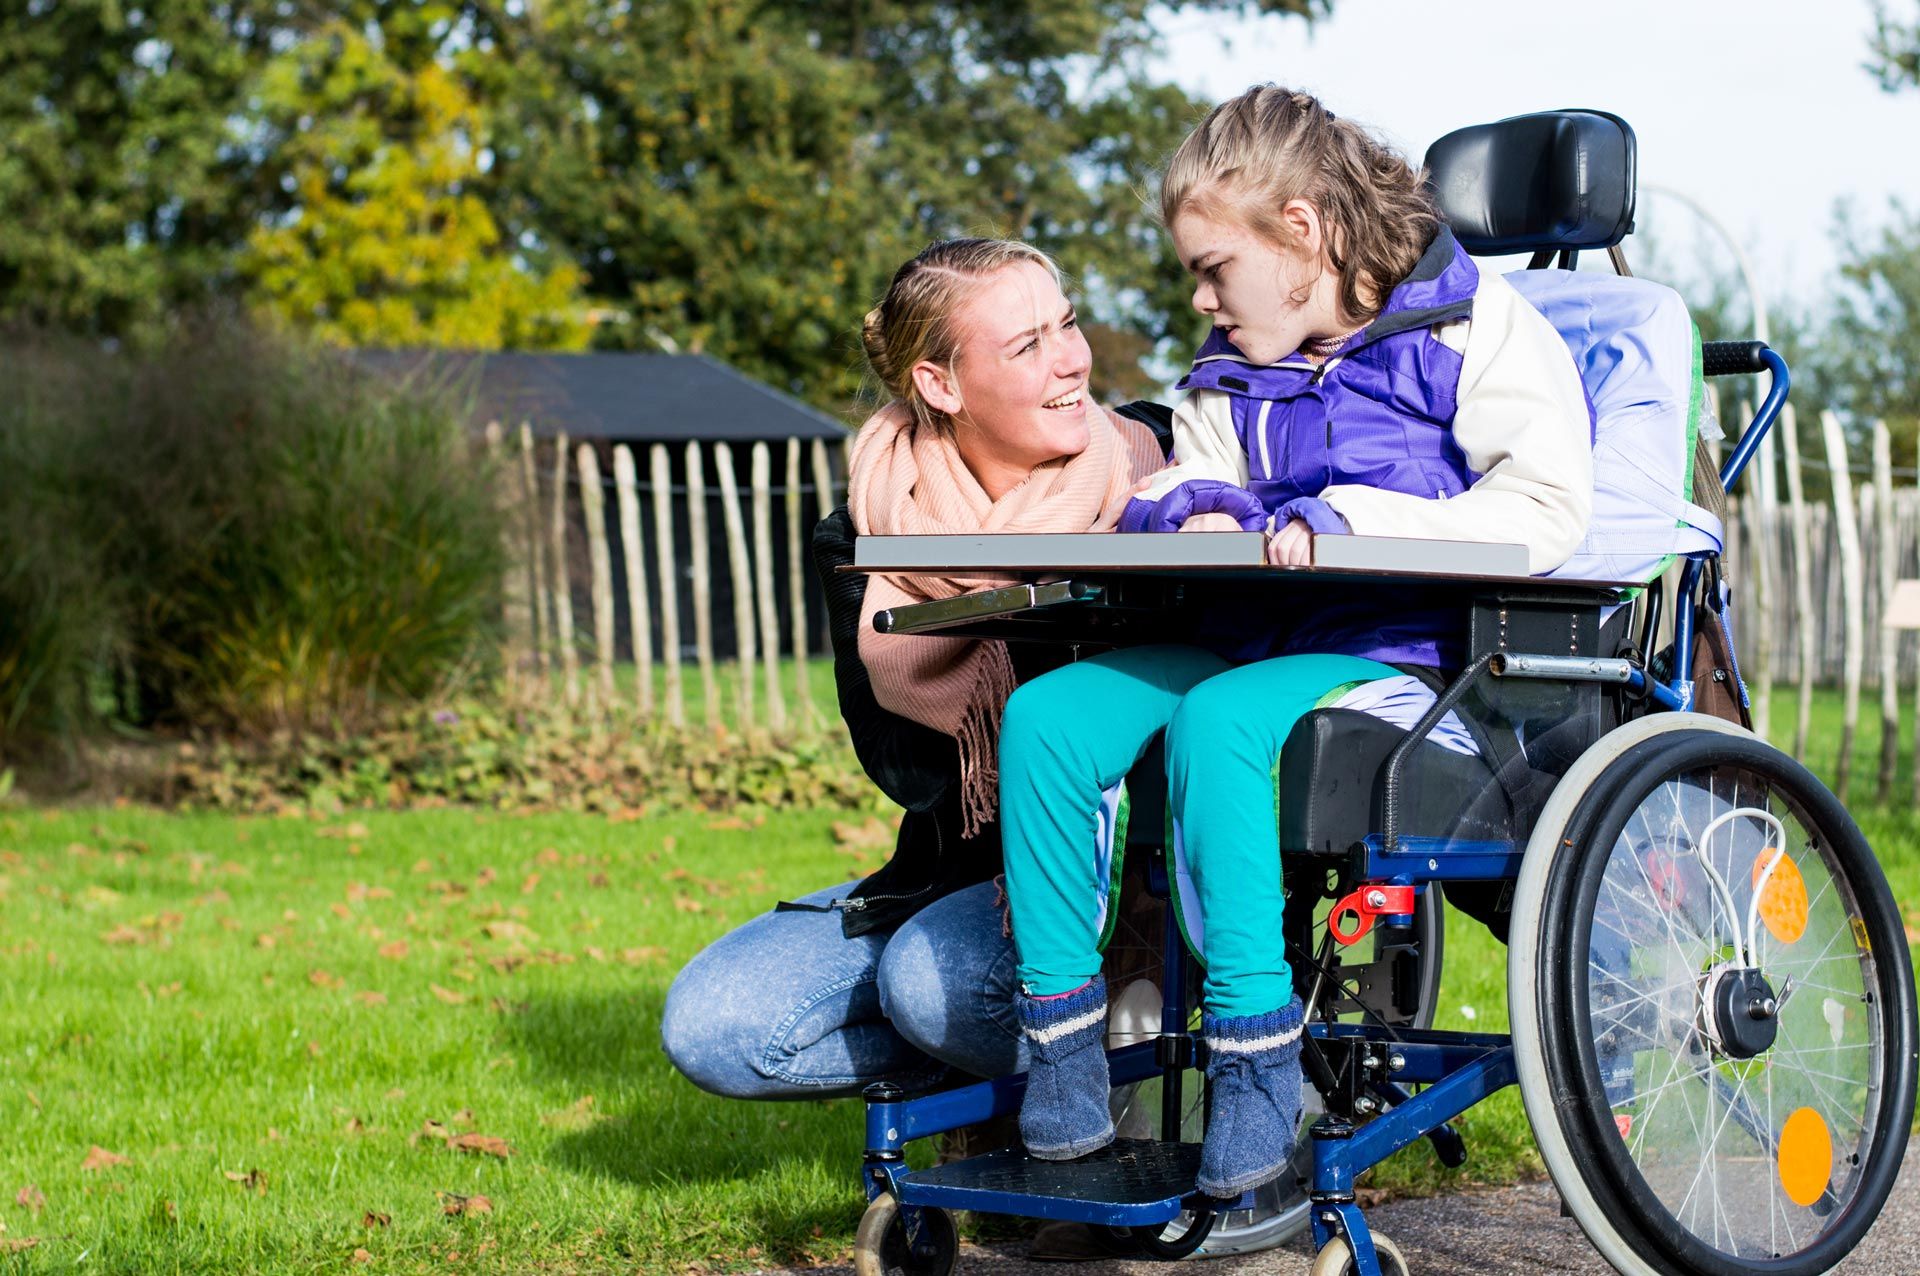 disabled-child-in-a-wheelchair-relaxing-outside-with-a-care-assistant-working-with-disability-340446914